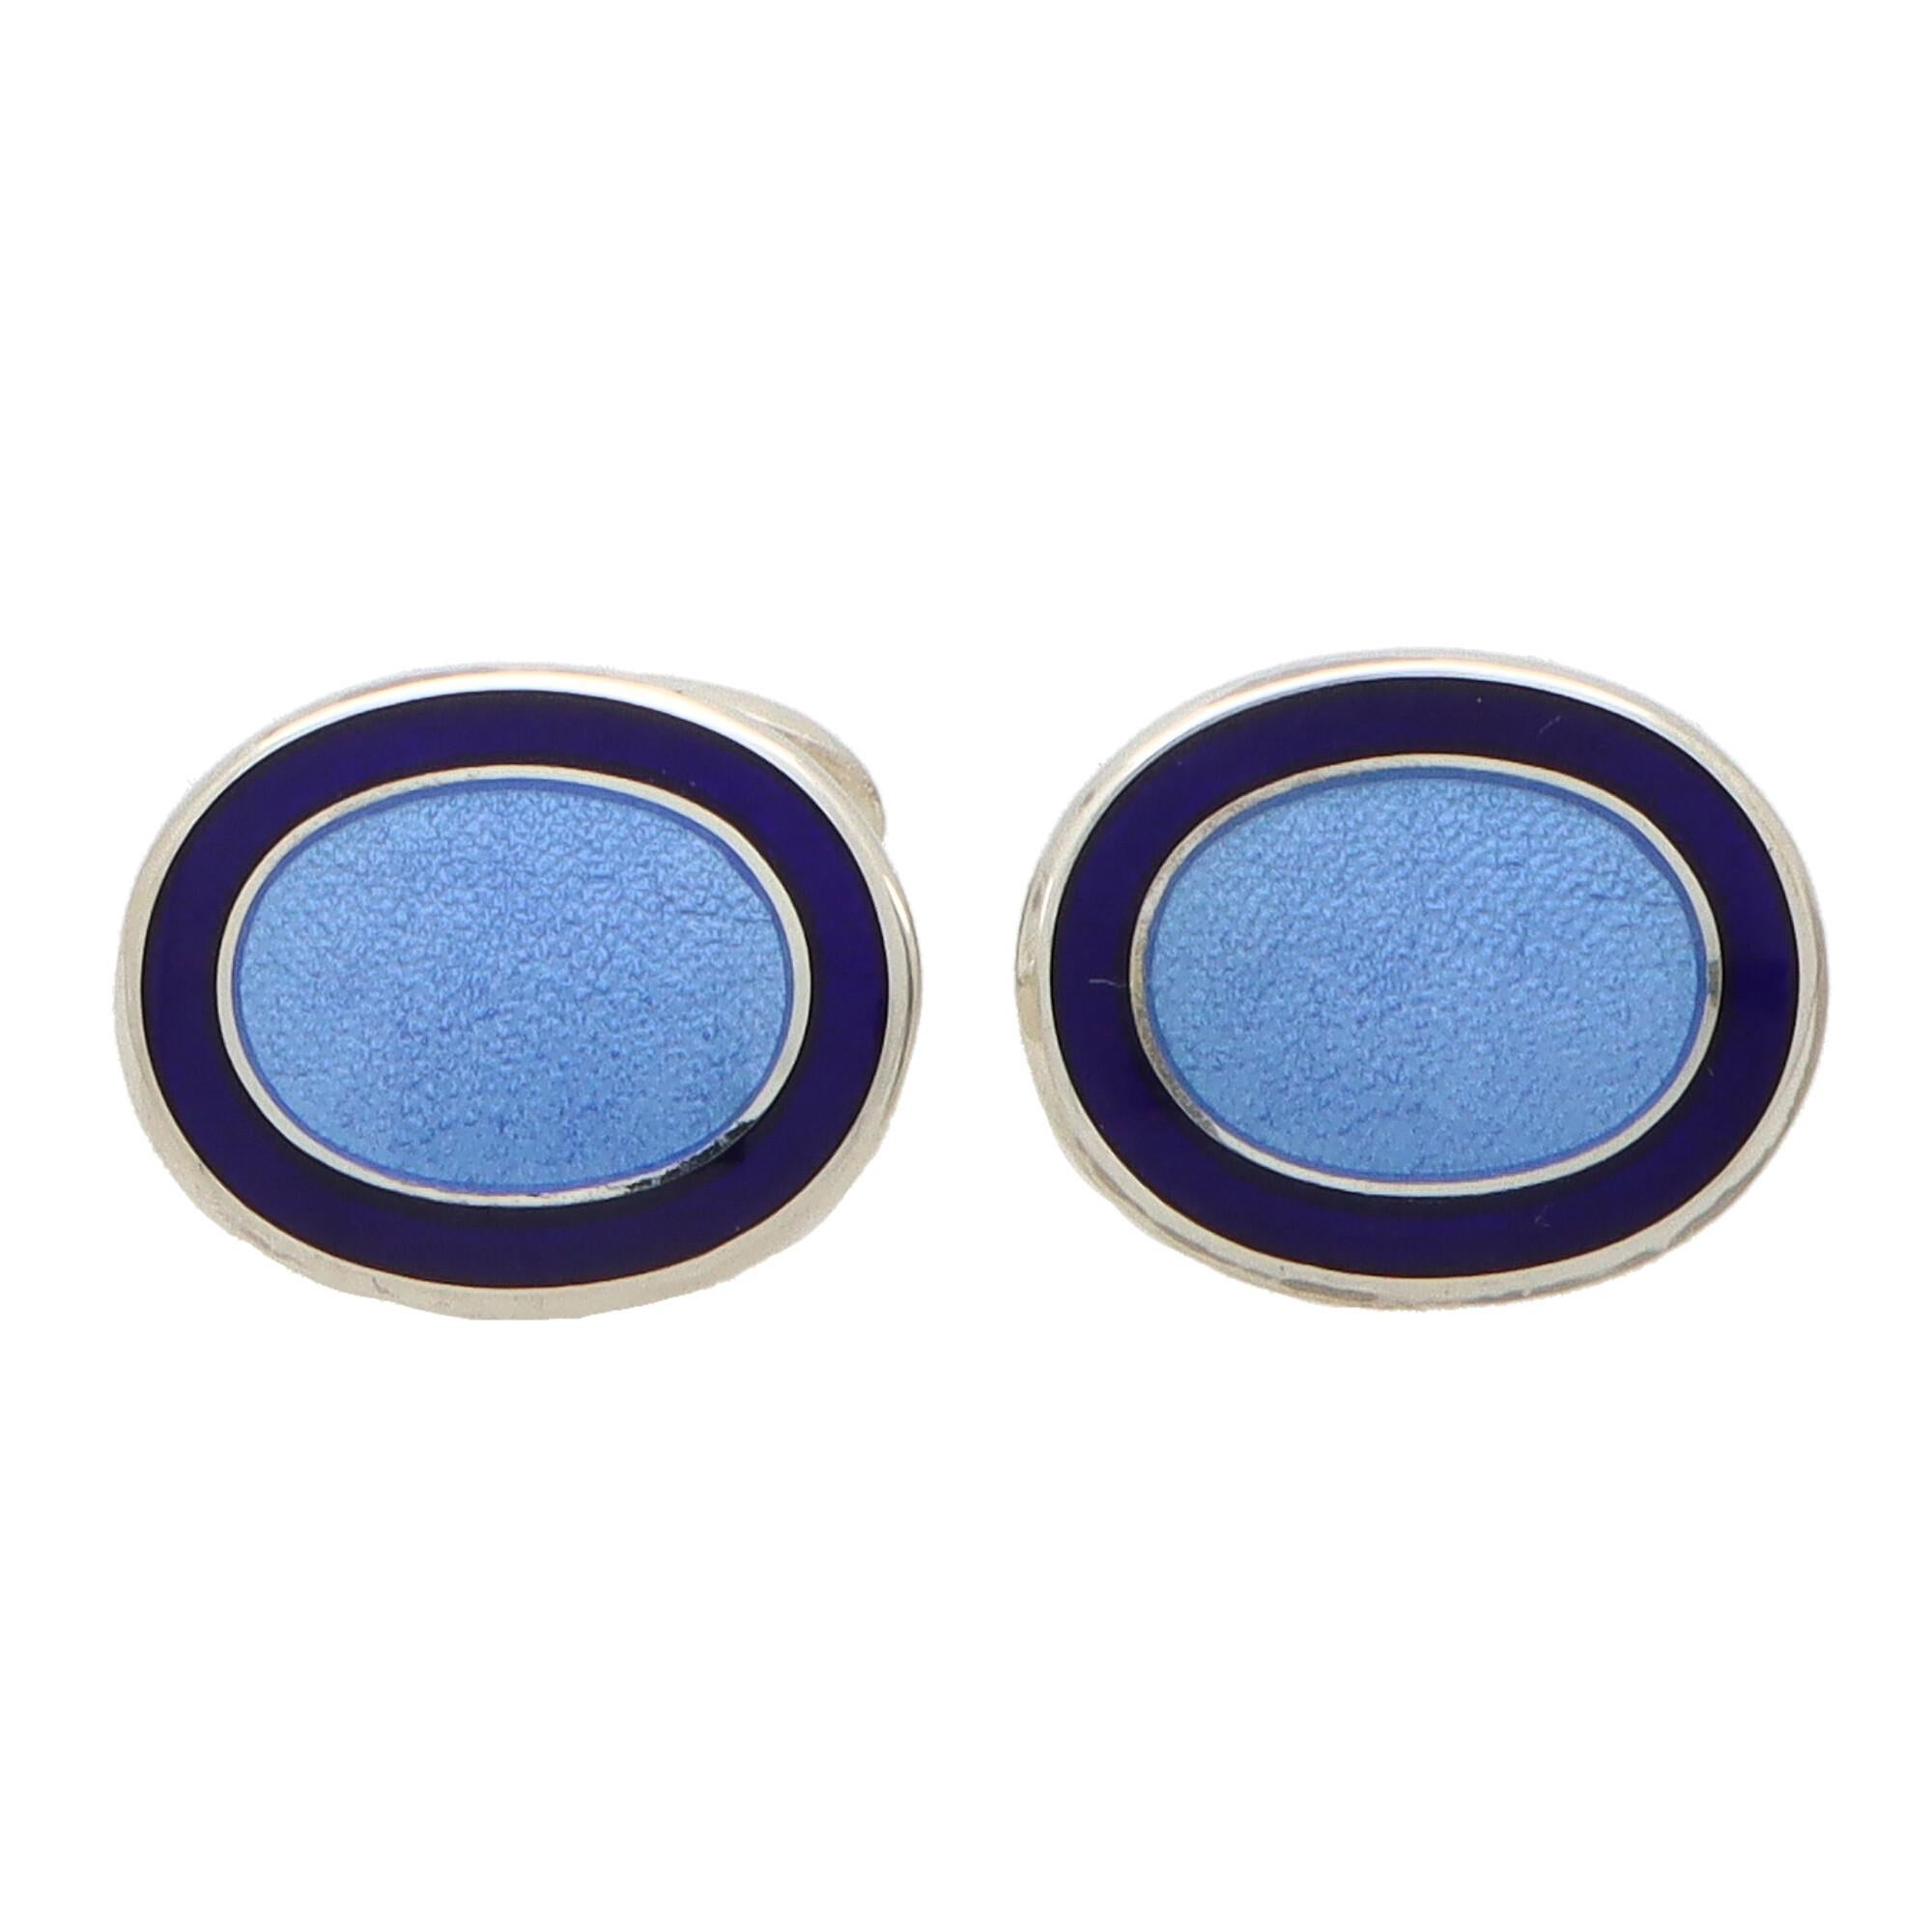 A stylish pair of navy and light blue enamel swivel back cufflinks made in British sterling silver.

Each cufflink is composed of two oval faces set centrally with a textured light blue panel and bordered by navy blue. They are secured to reverse